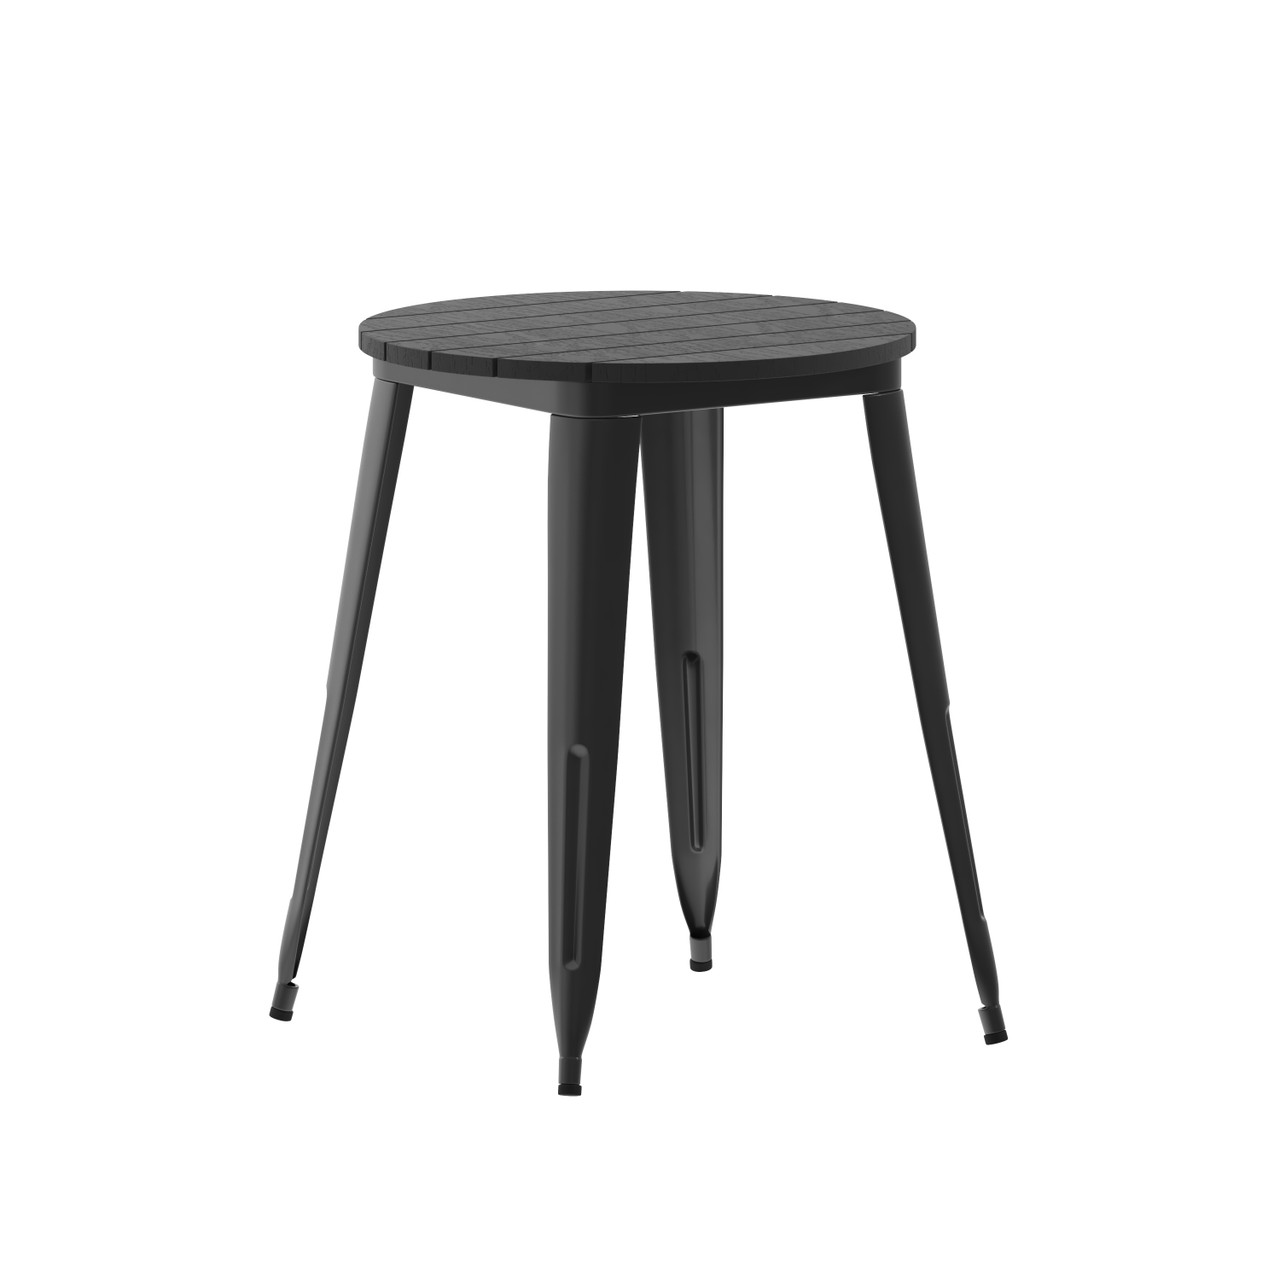 Flash Furniture Declan Commercial Grade Indoor/Outdoor Dining Table, 23.75" Round All Weather Black Poly Resin Top w/ Black Steel Base, Model#